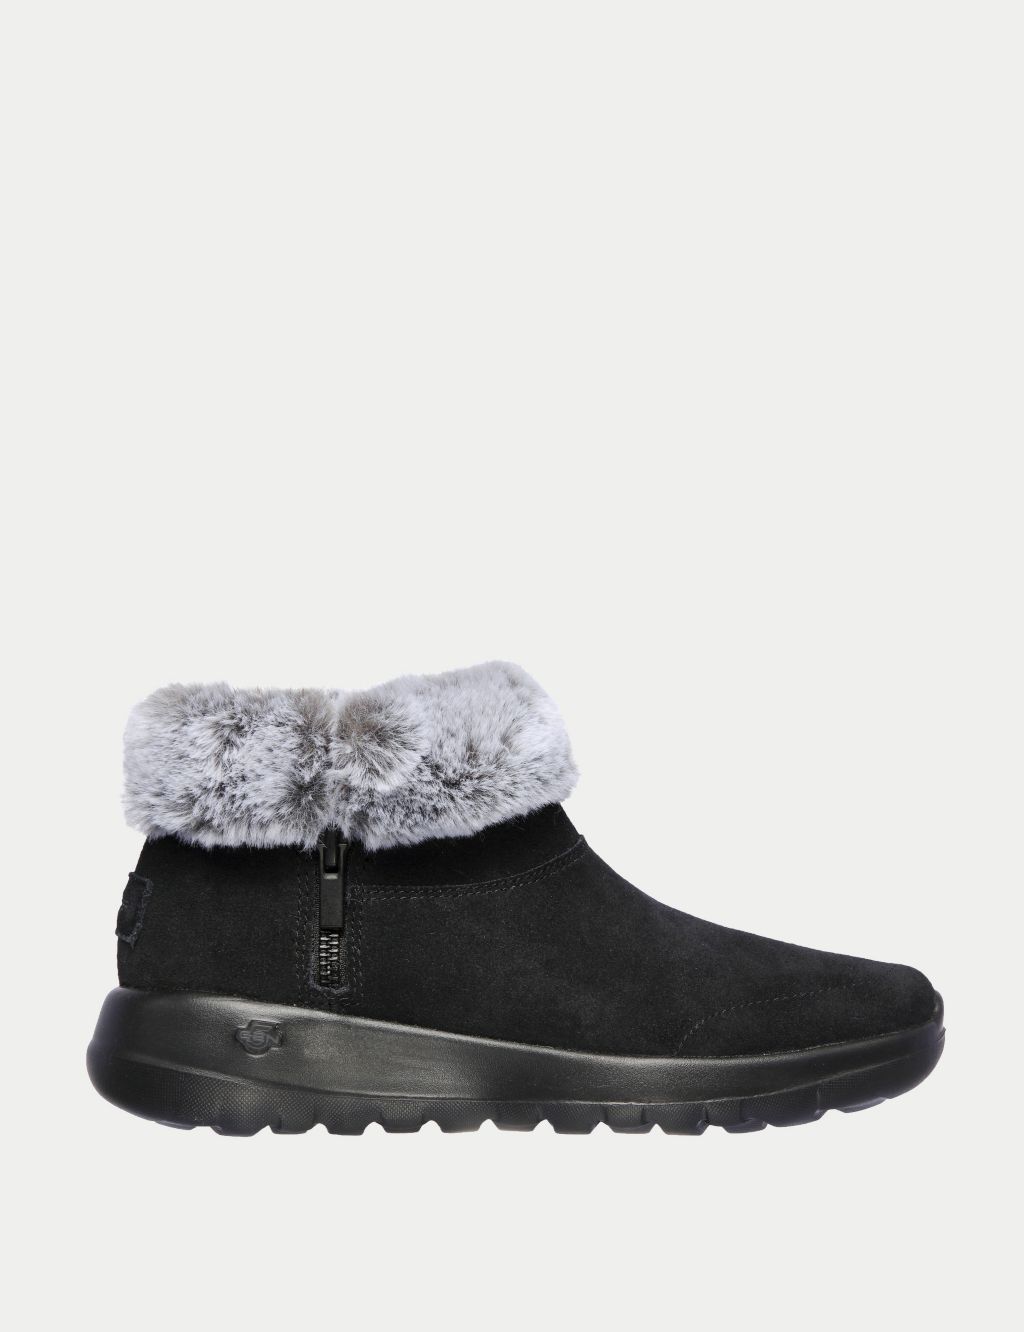 On-The-Go Joy Savvy Suede Ankle Boots image 1